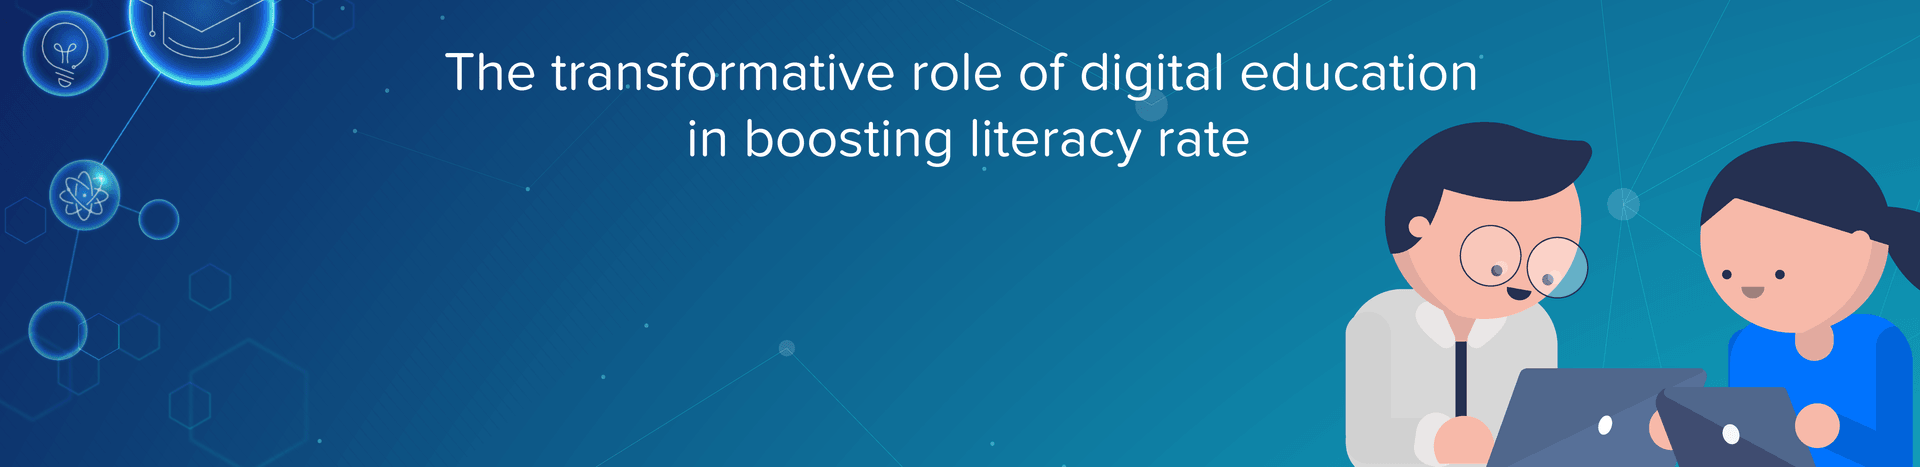 The Transformative Role of Digital Education in Boosting Literacy Rate